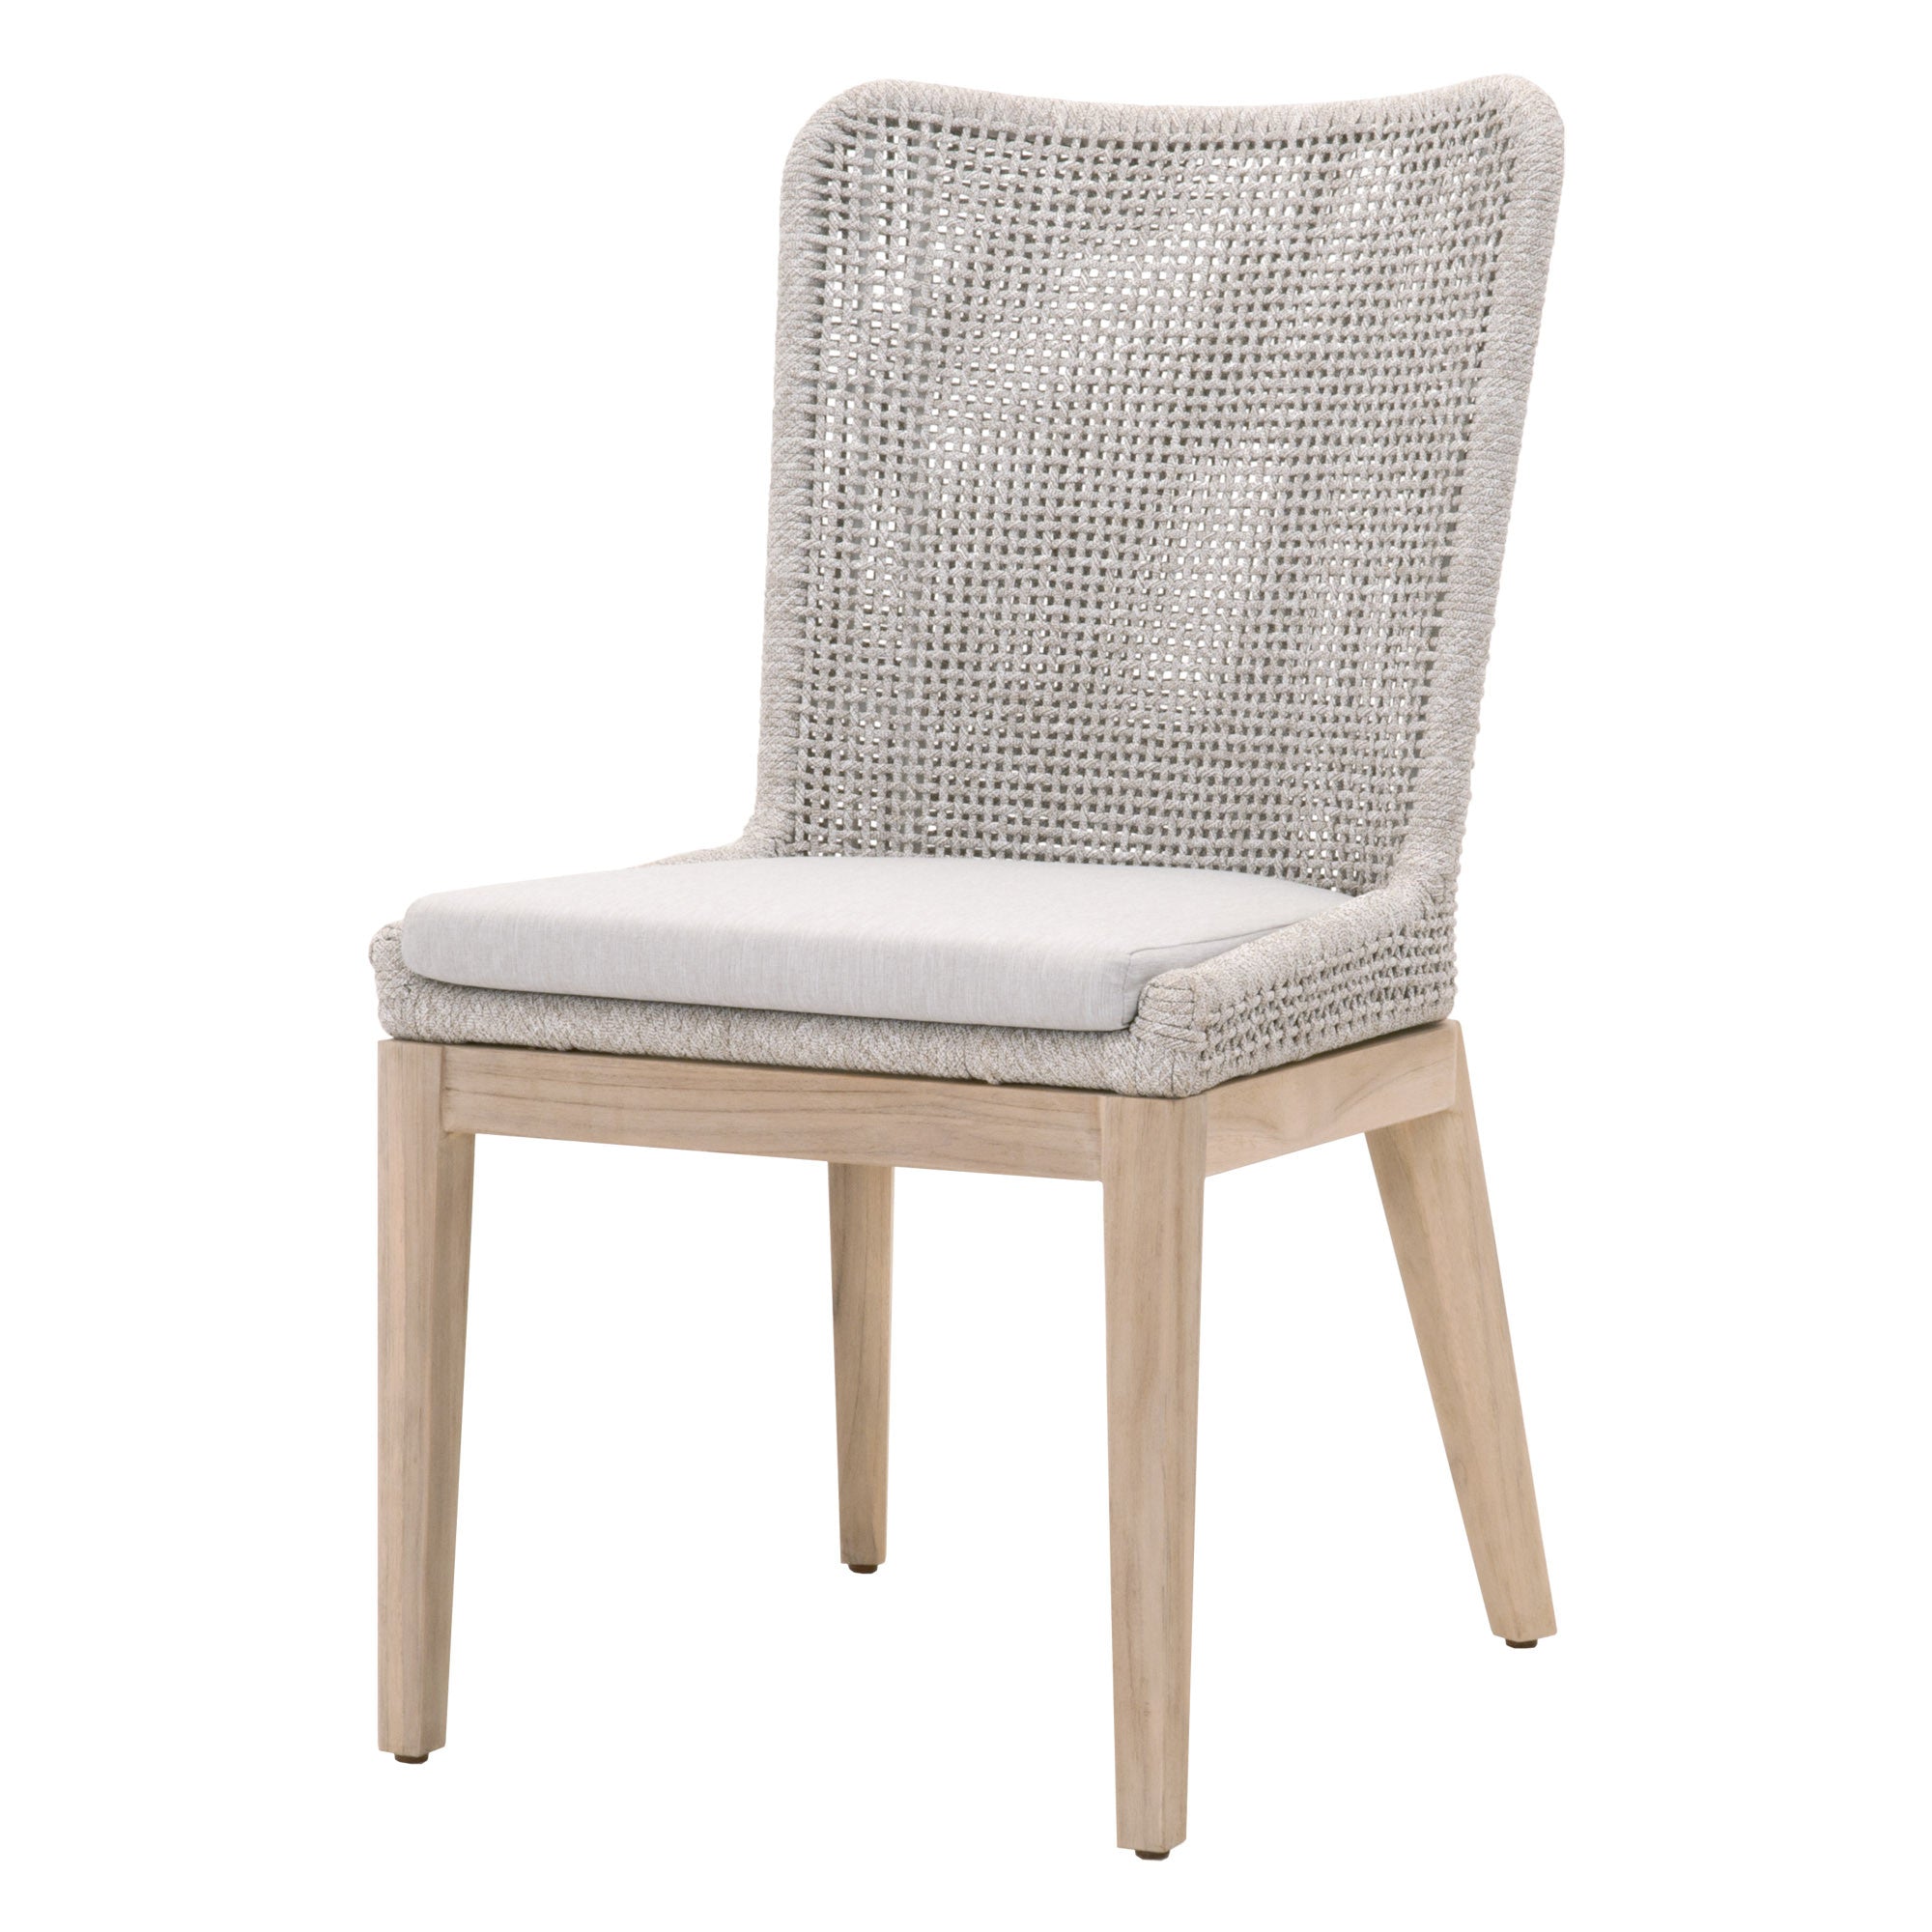 25" Set Of Two Taupe And Natural Solid Wood Dining Chair With Gray Cushion - Tuesday Morning-Outdoor Chairs